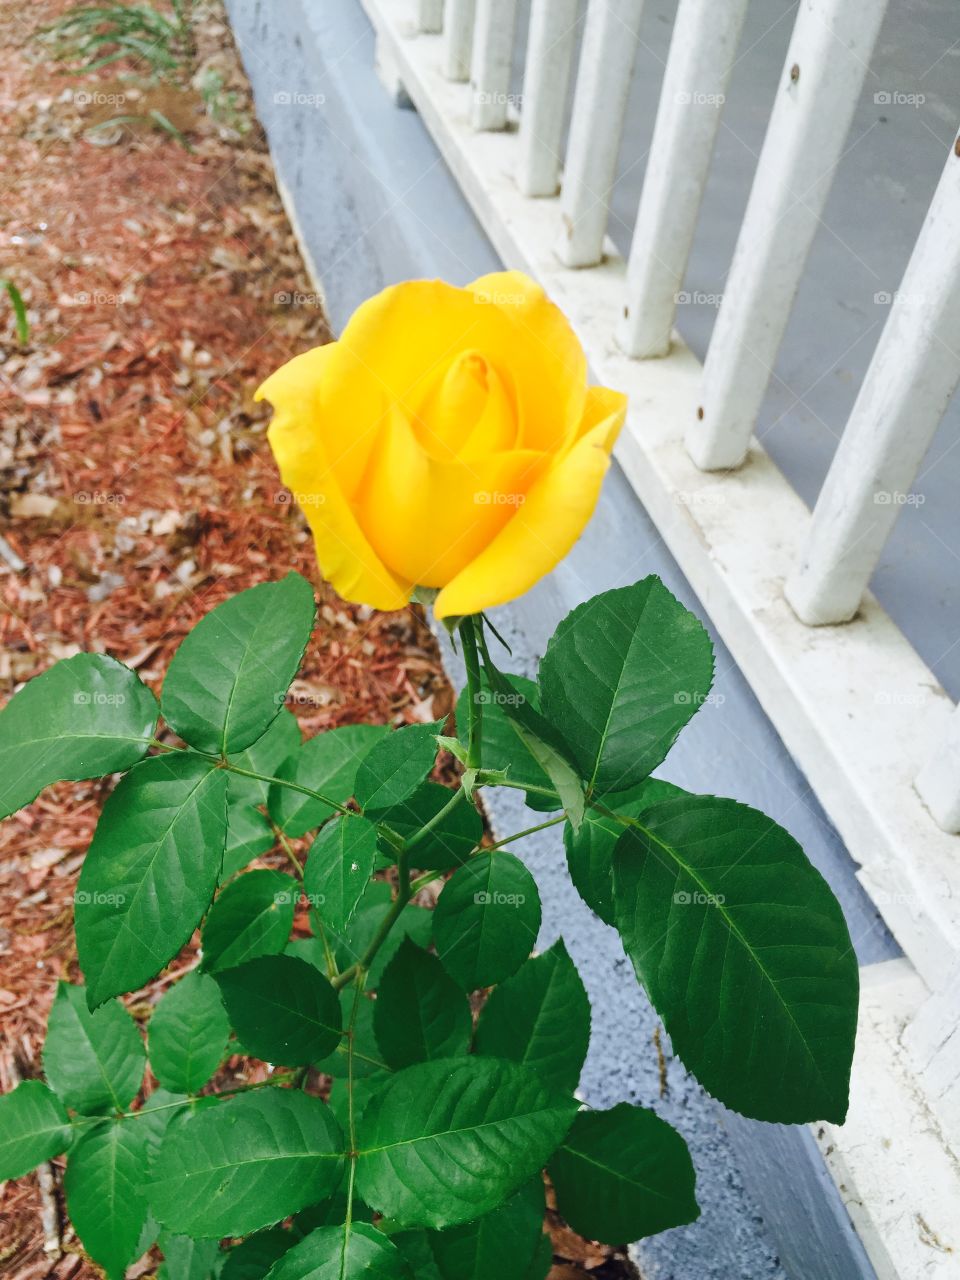 Our Friend, The Rose